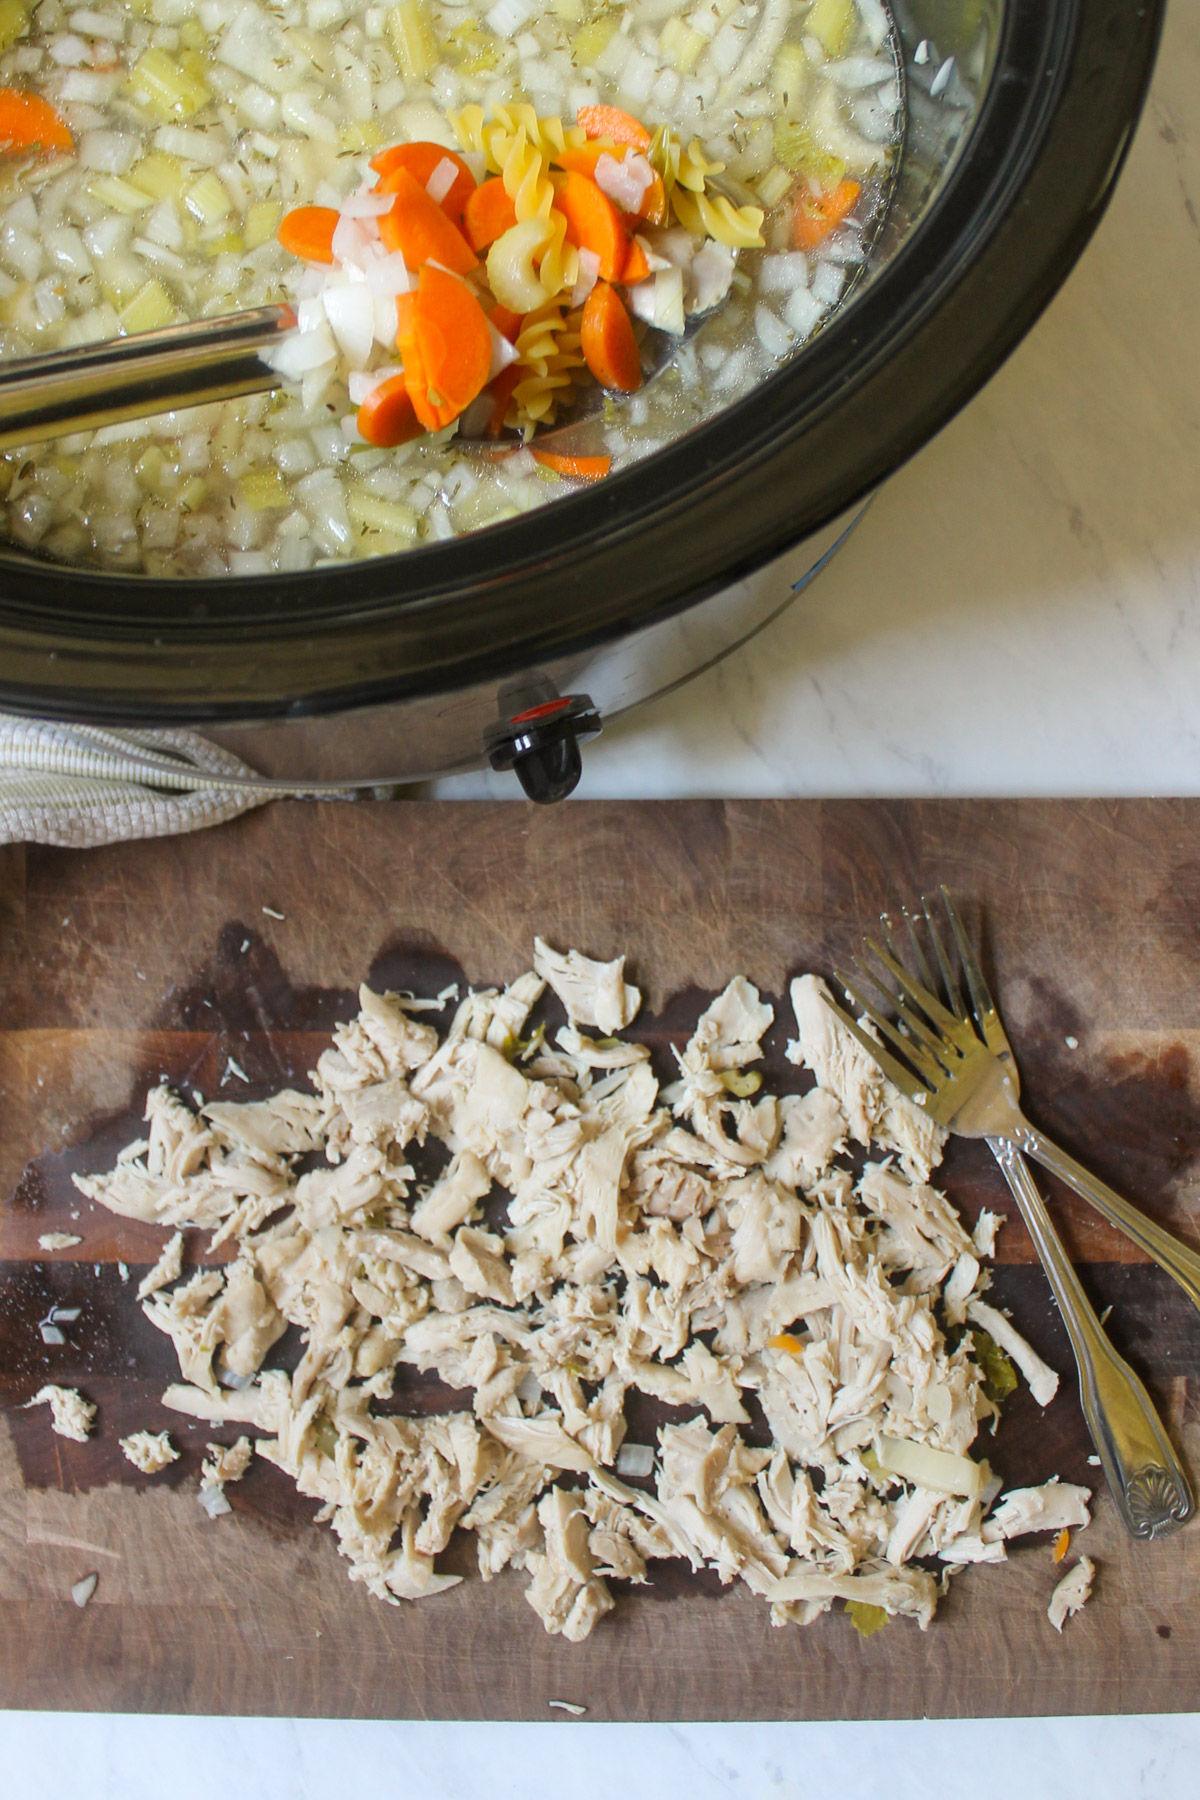 Chicken shredded with forks on a cutting board next to a crockpot of chicken noodle soup.